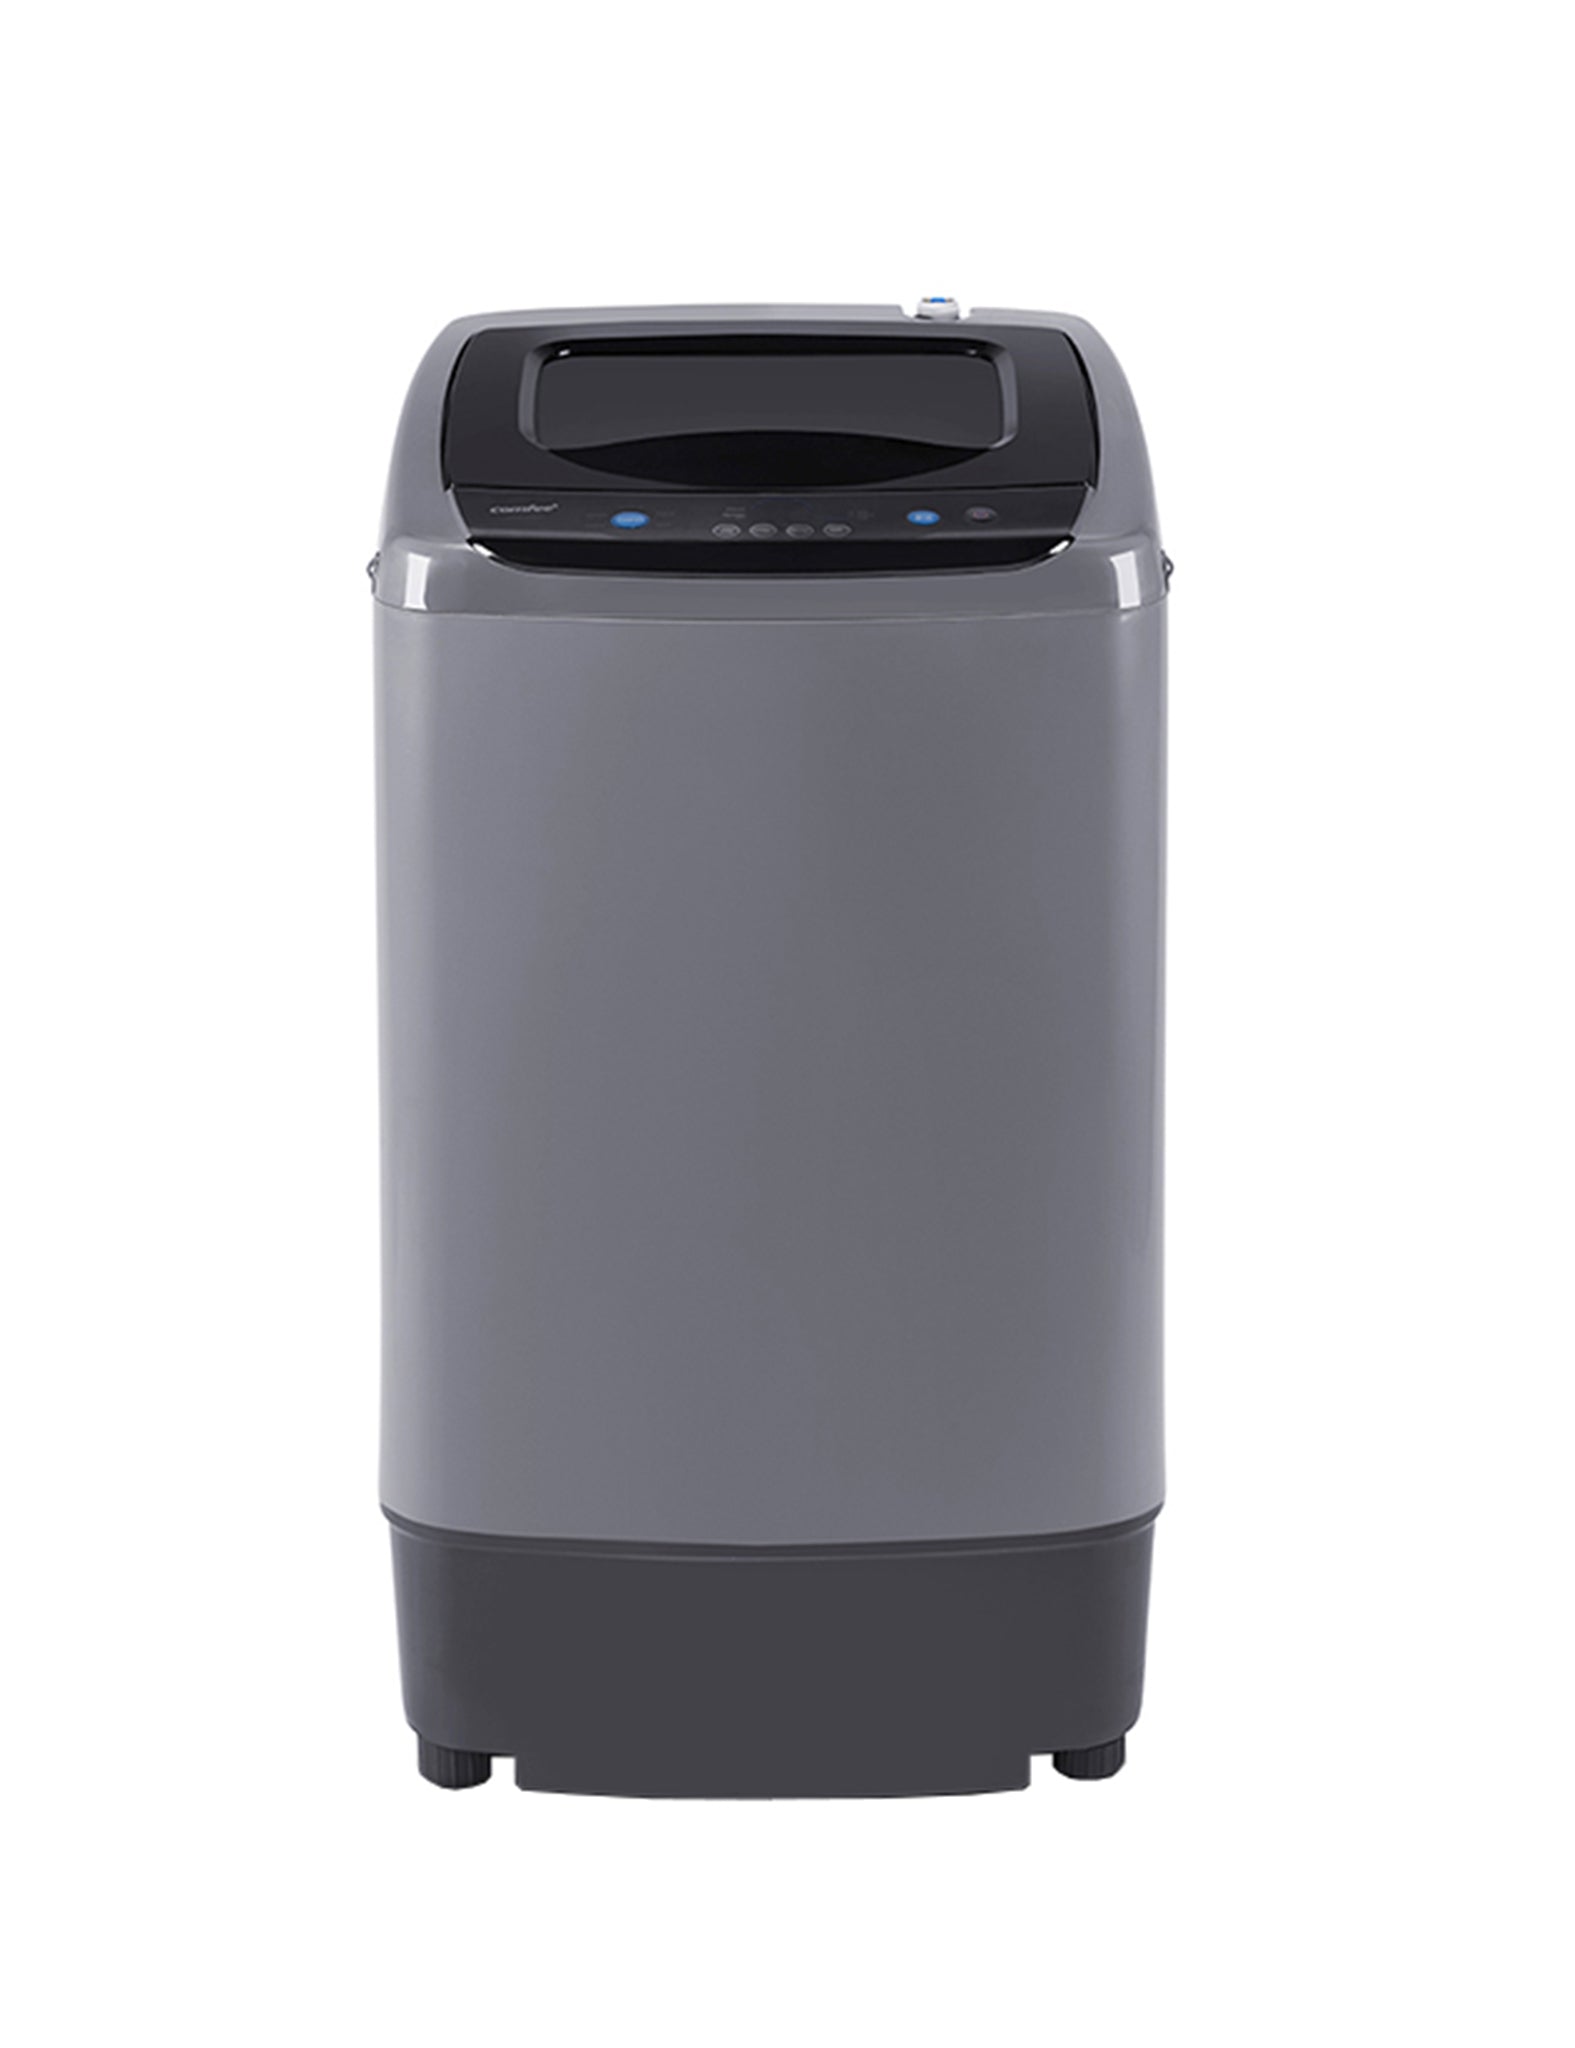 Comfee 0.9 Cu. Ft. Compact Portable Washer Brand New In Unopened